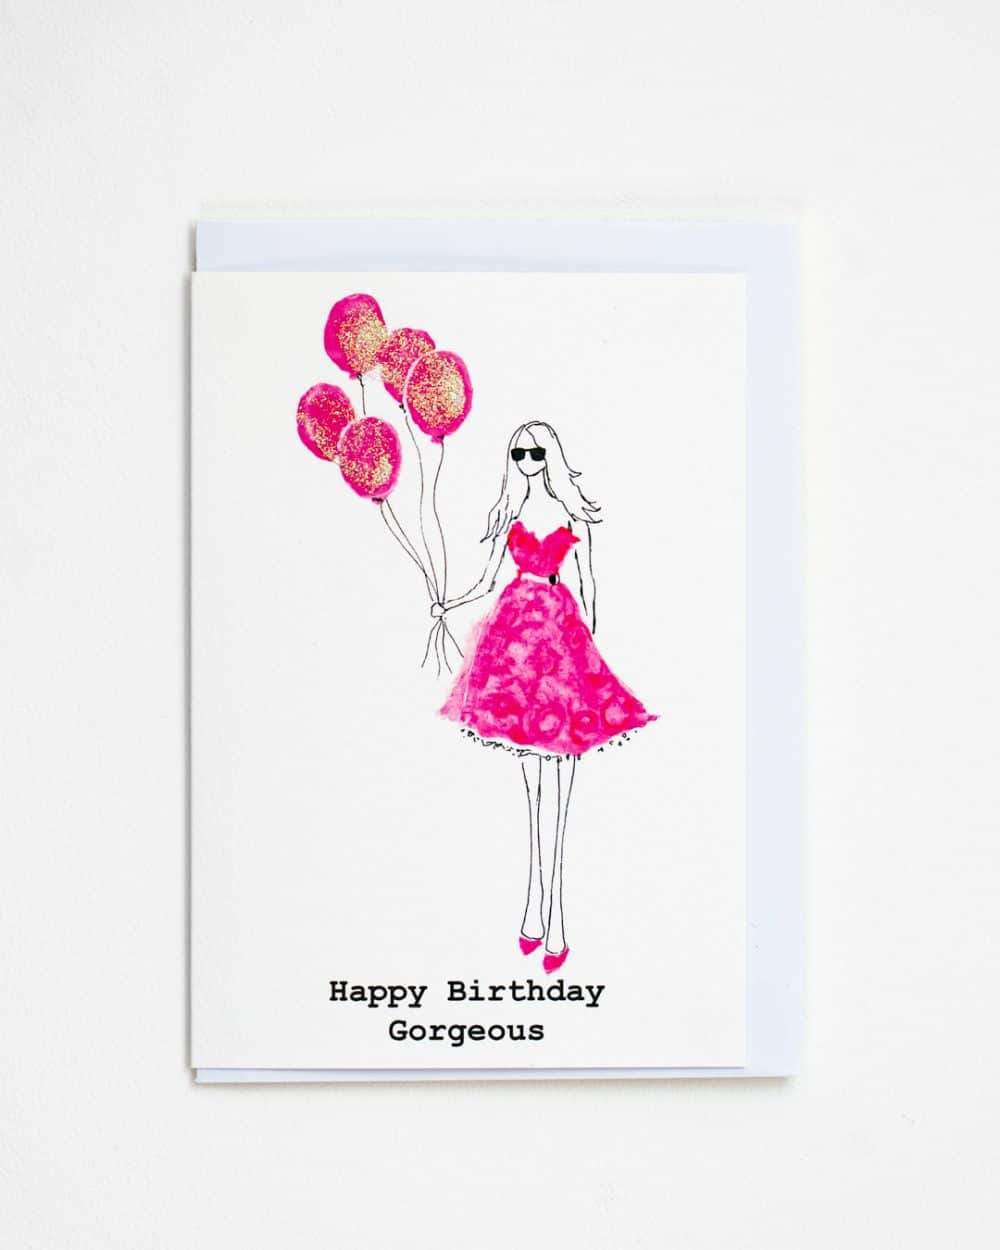 Happy Birthday Gorgeous A6 Card Eco Friendly Products